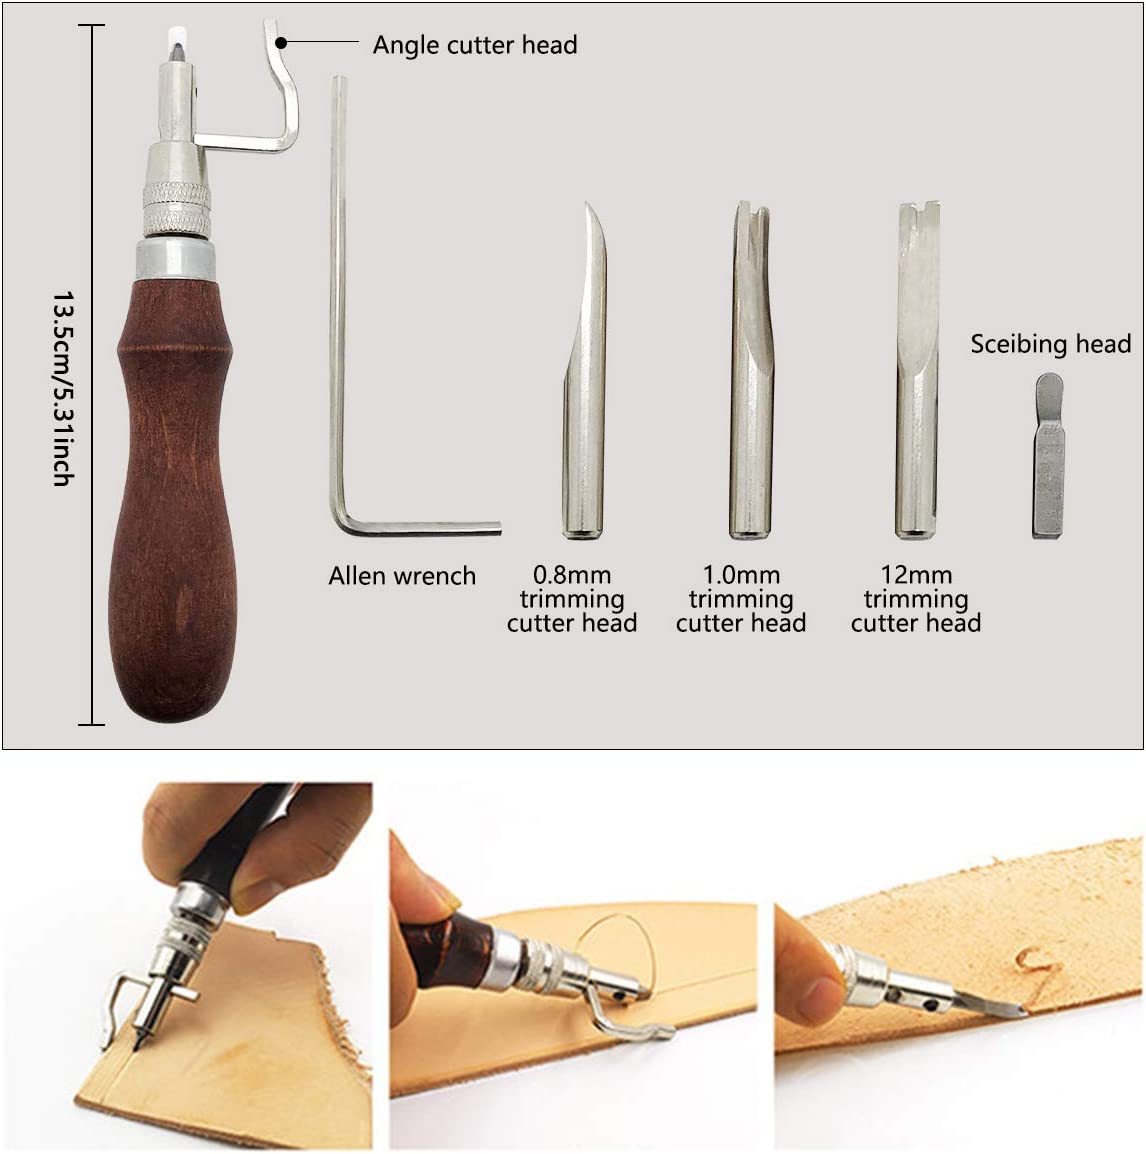 Leather Craft Kit With Waxed Thread Groover Awl Stitching Punch